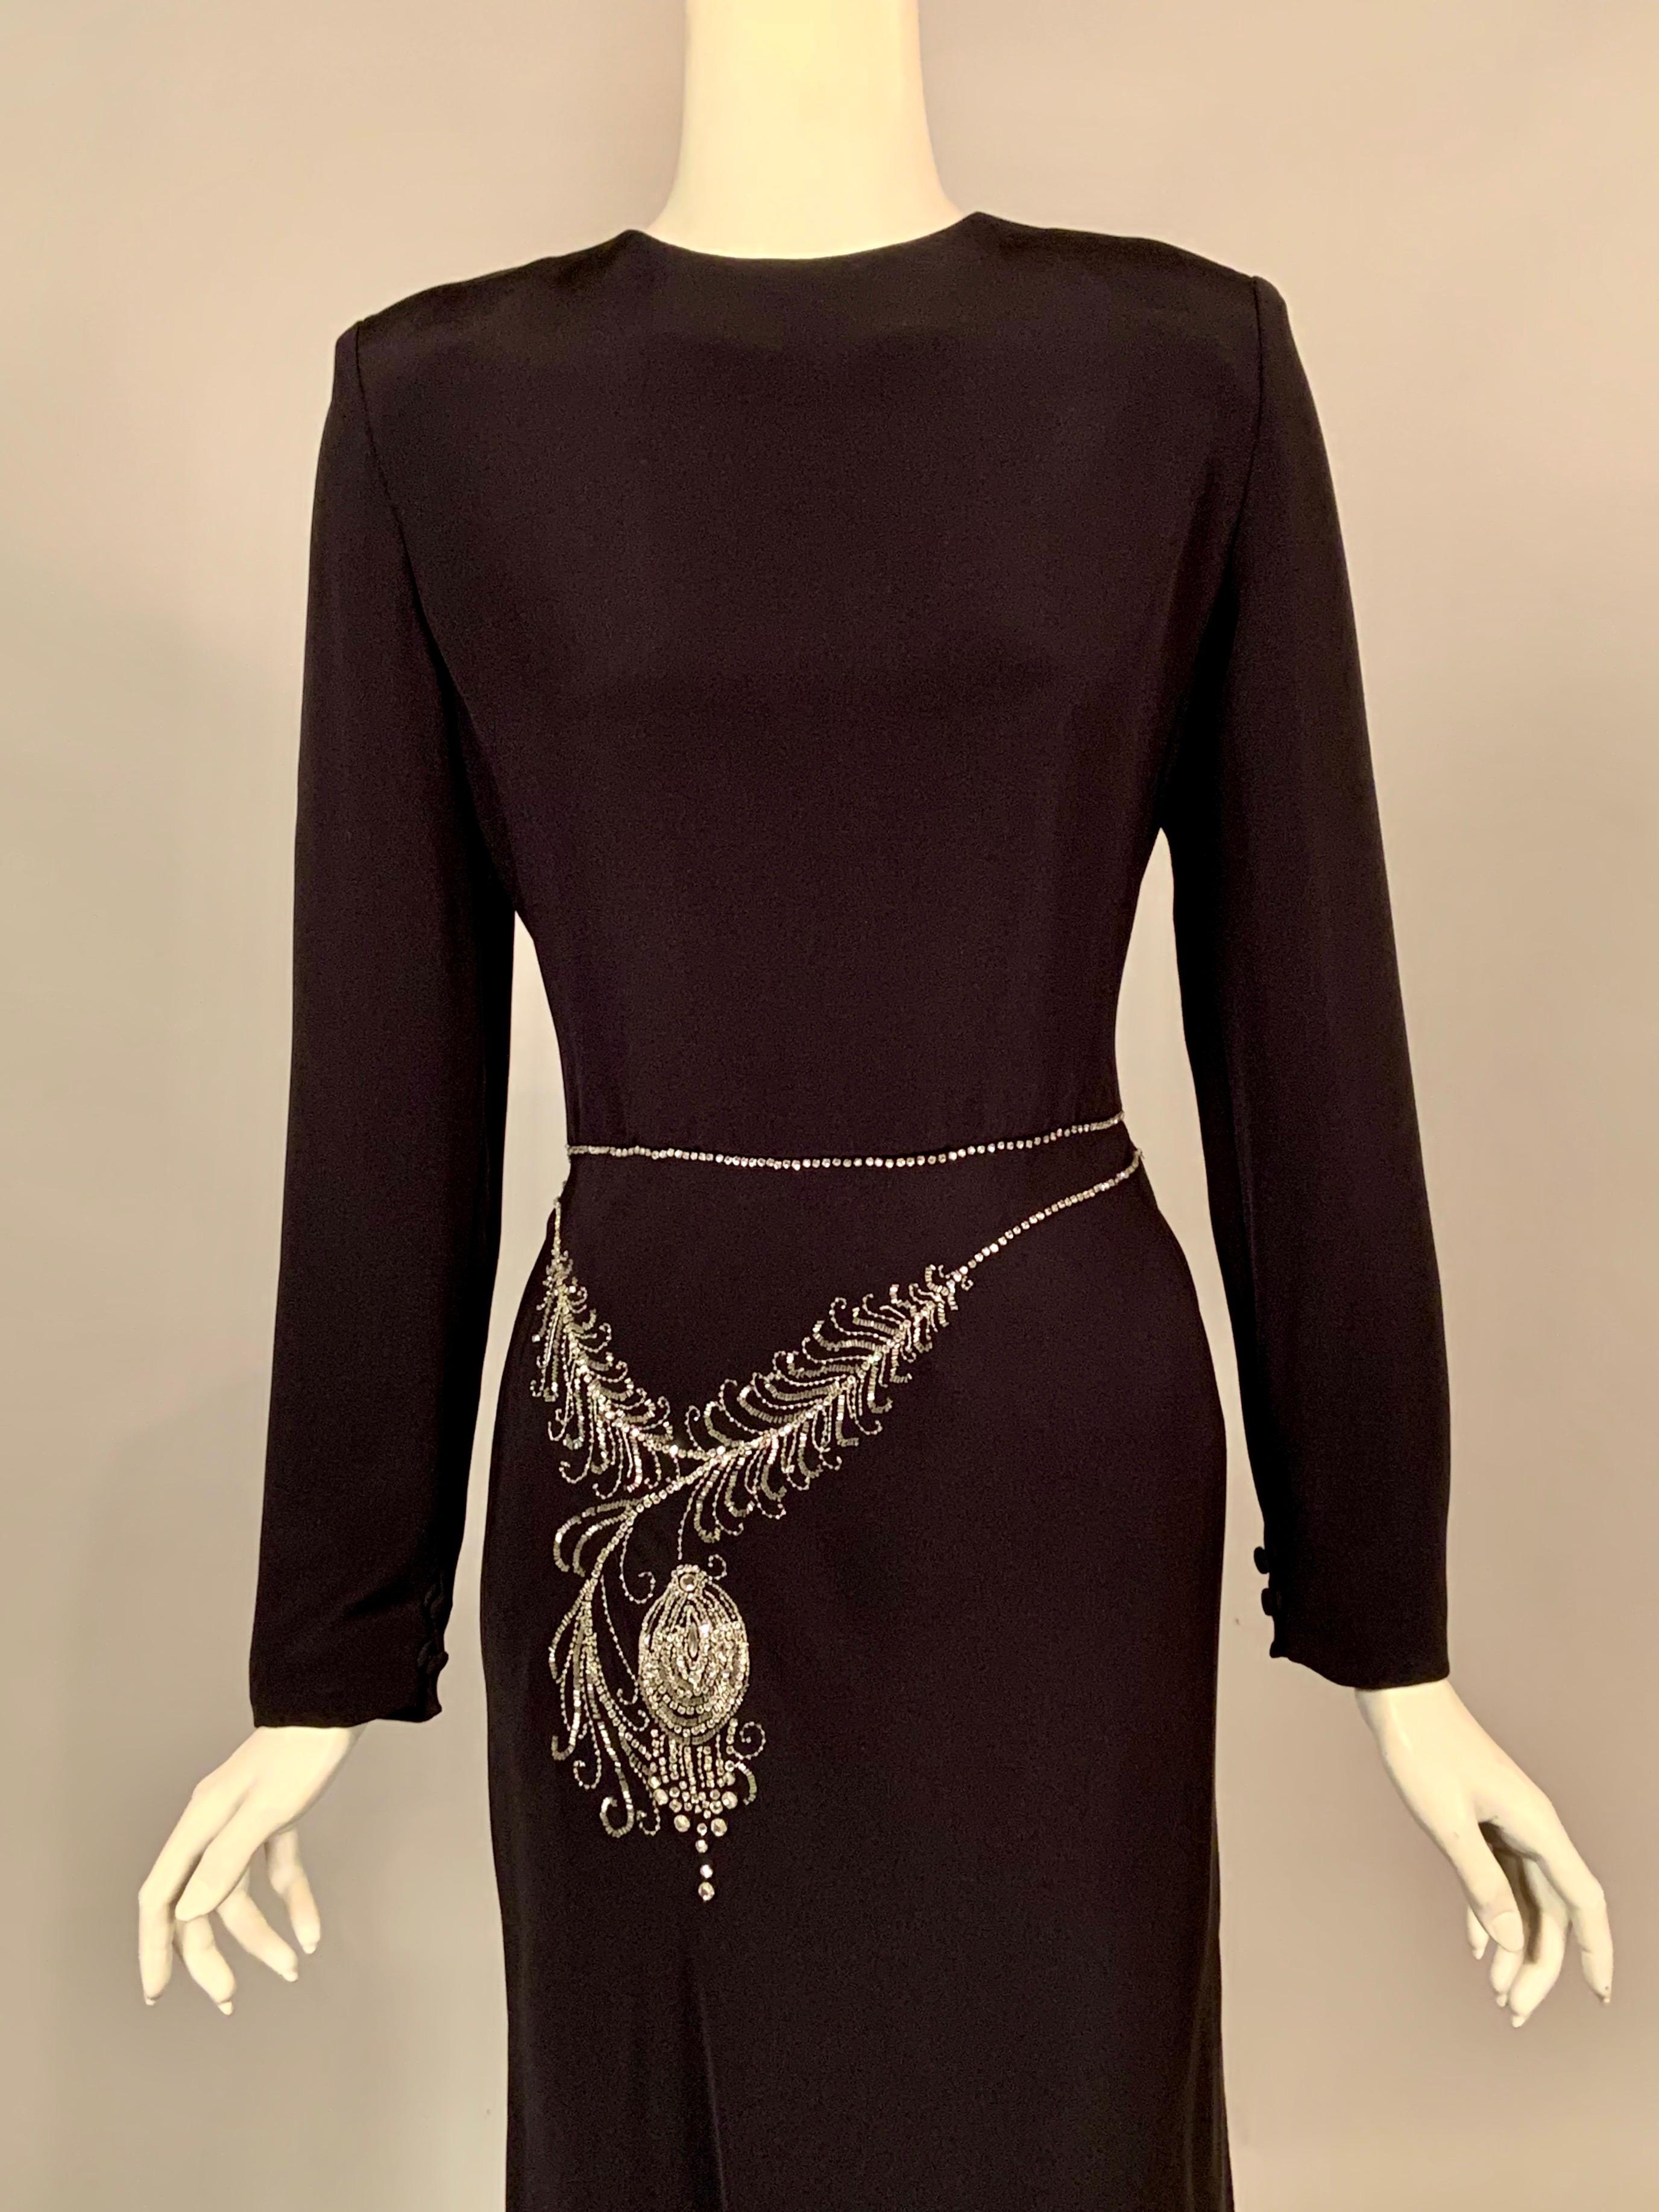 What a great design! This black silk evening dress from Bill Blass is a classic design with a fun twist. It has a round neckline, long sleeves with buttons and loops at the wrist, and a natural waistline. This is where the fun begins, the dress has